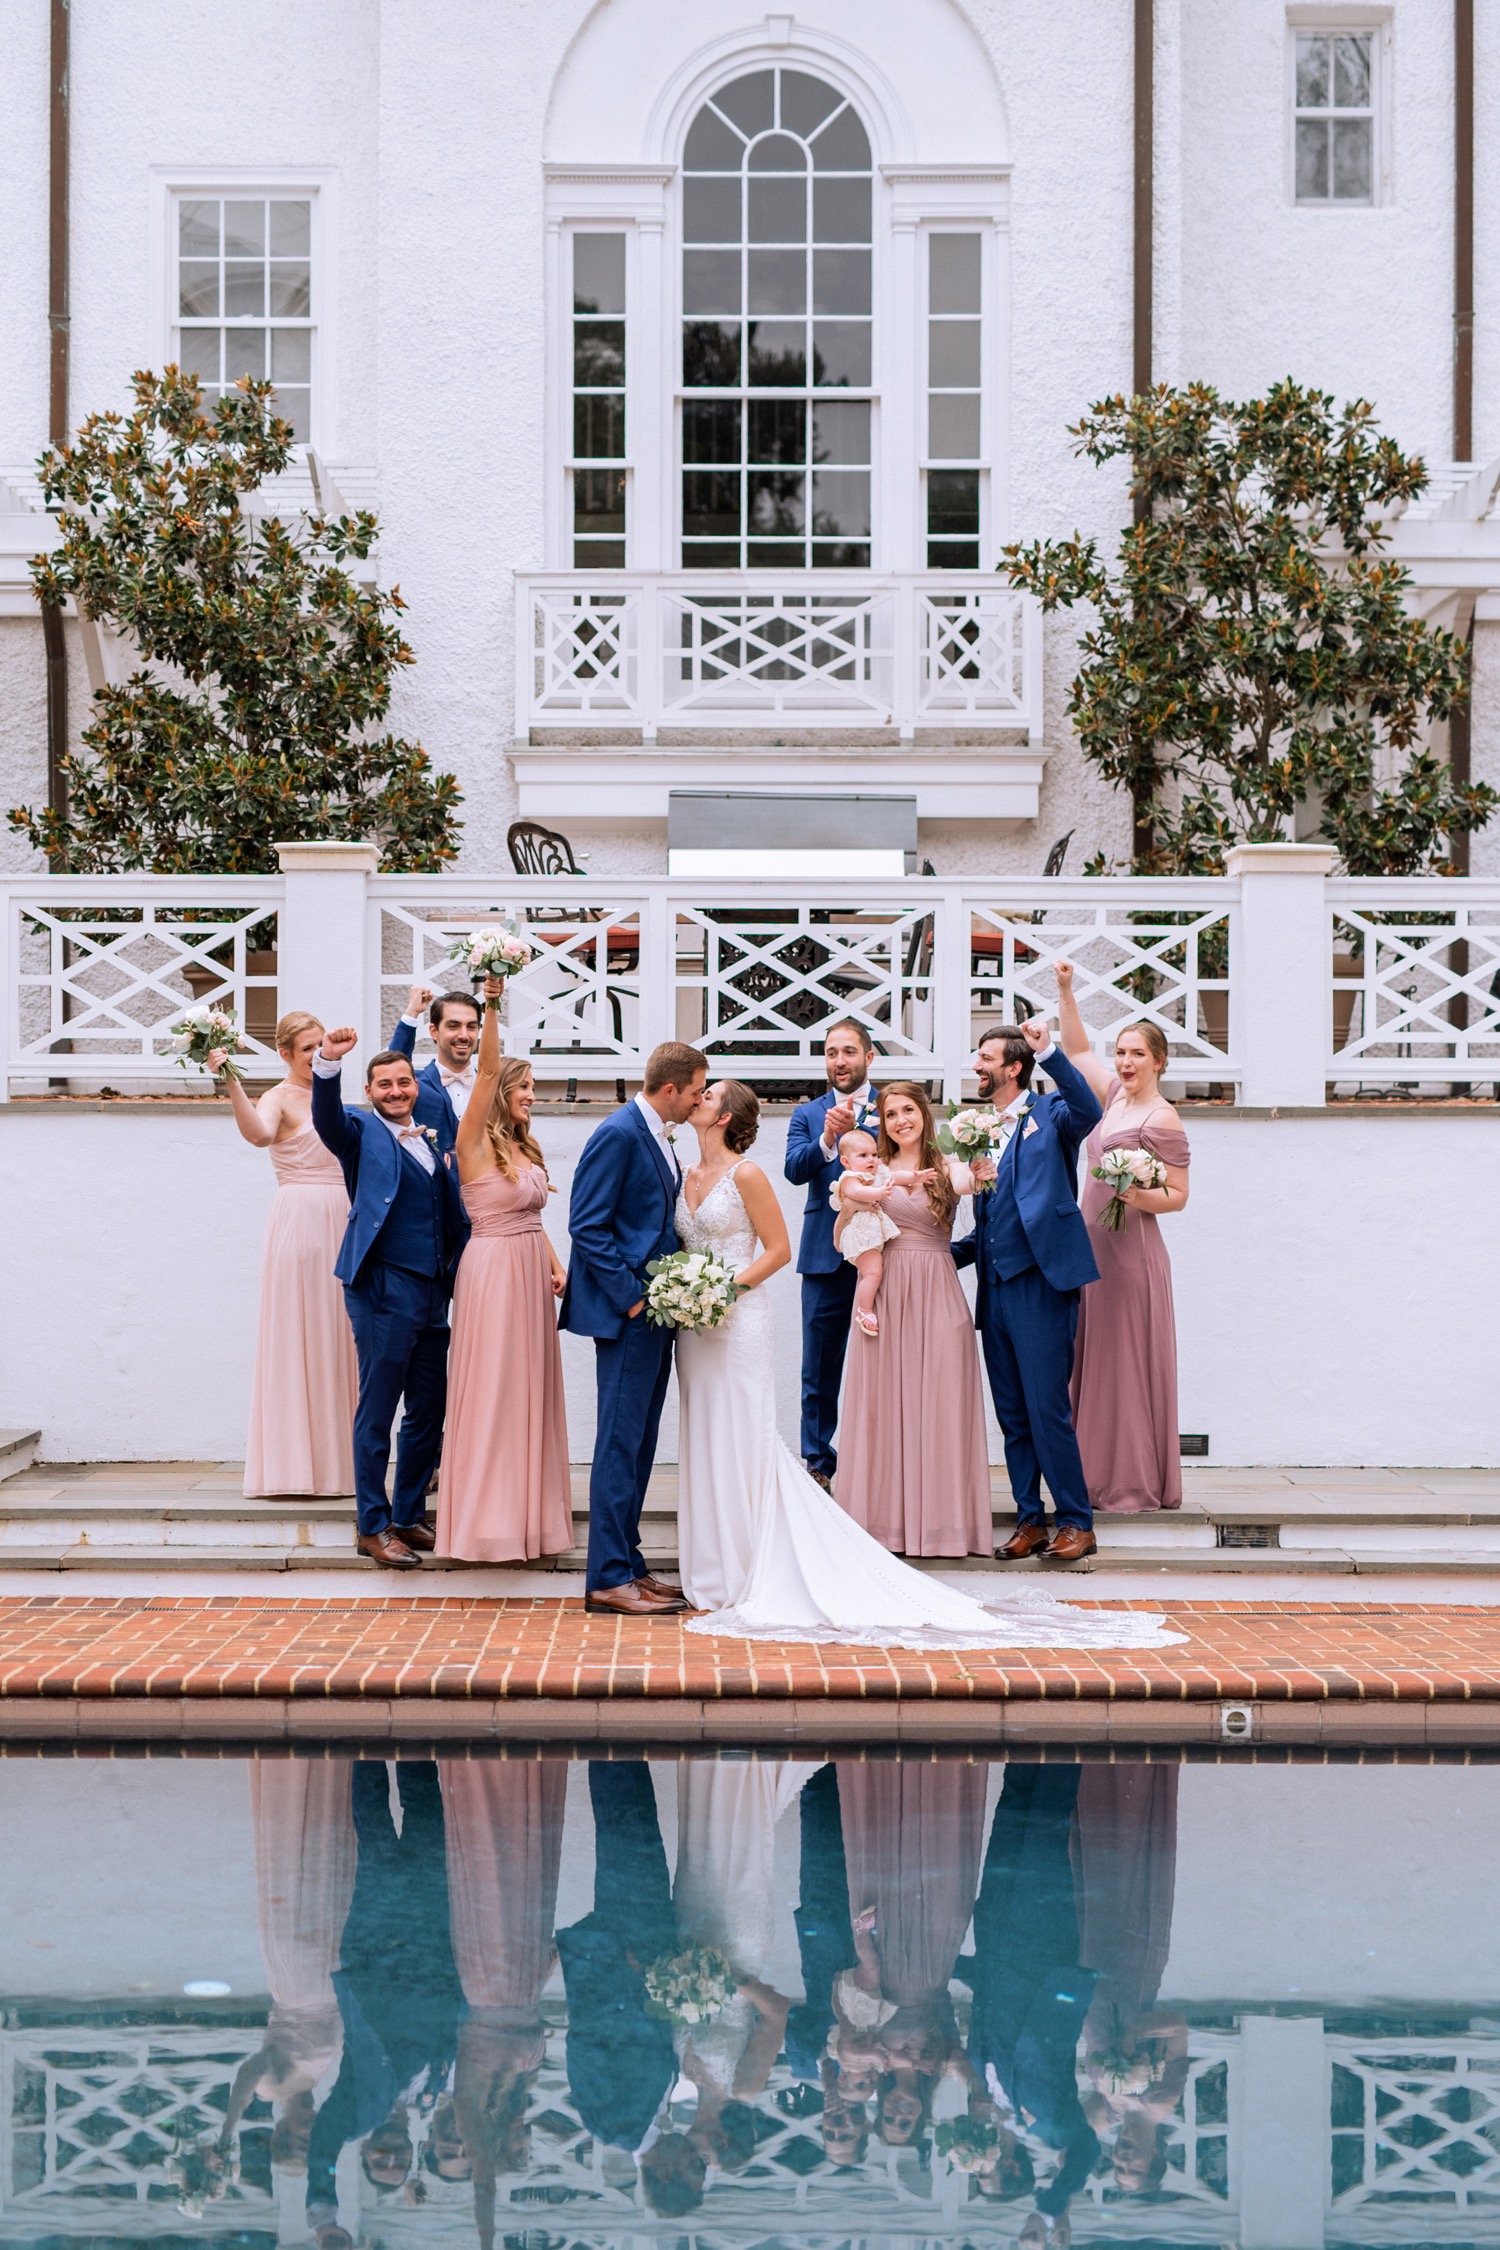 entire wedding party wearing light pink and purple dresses and navy blue tuxes posing and walking with the bride and groom on their wedding day